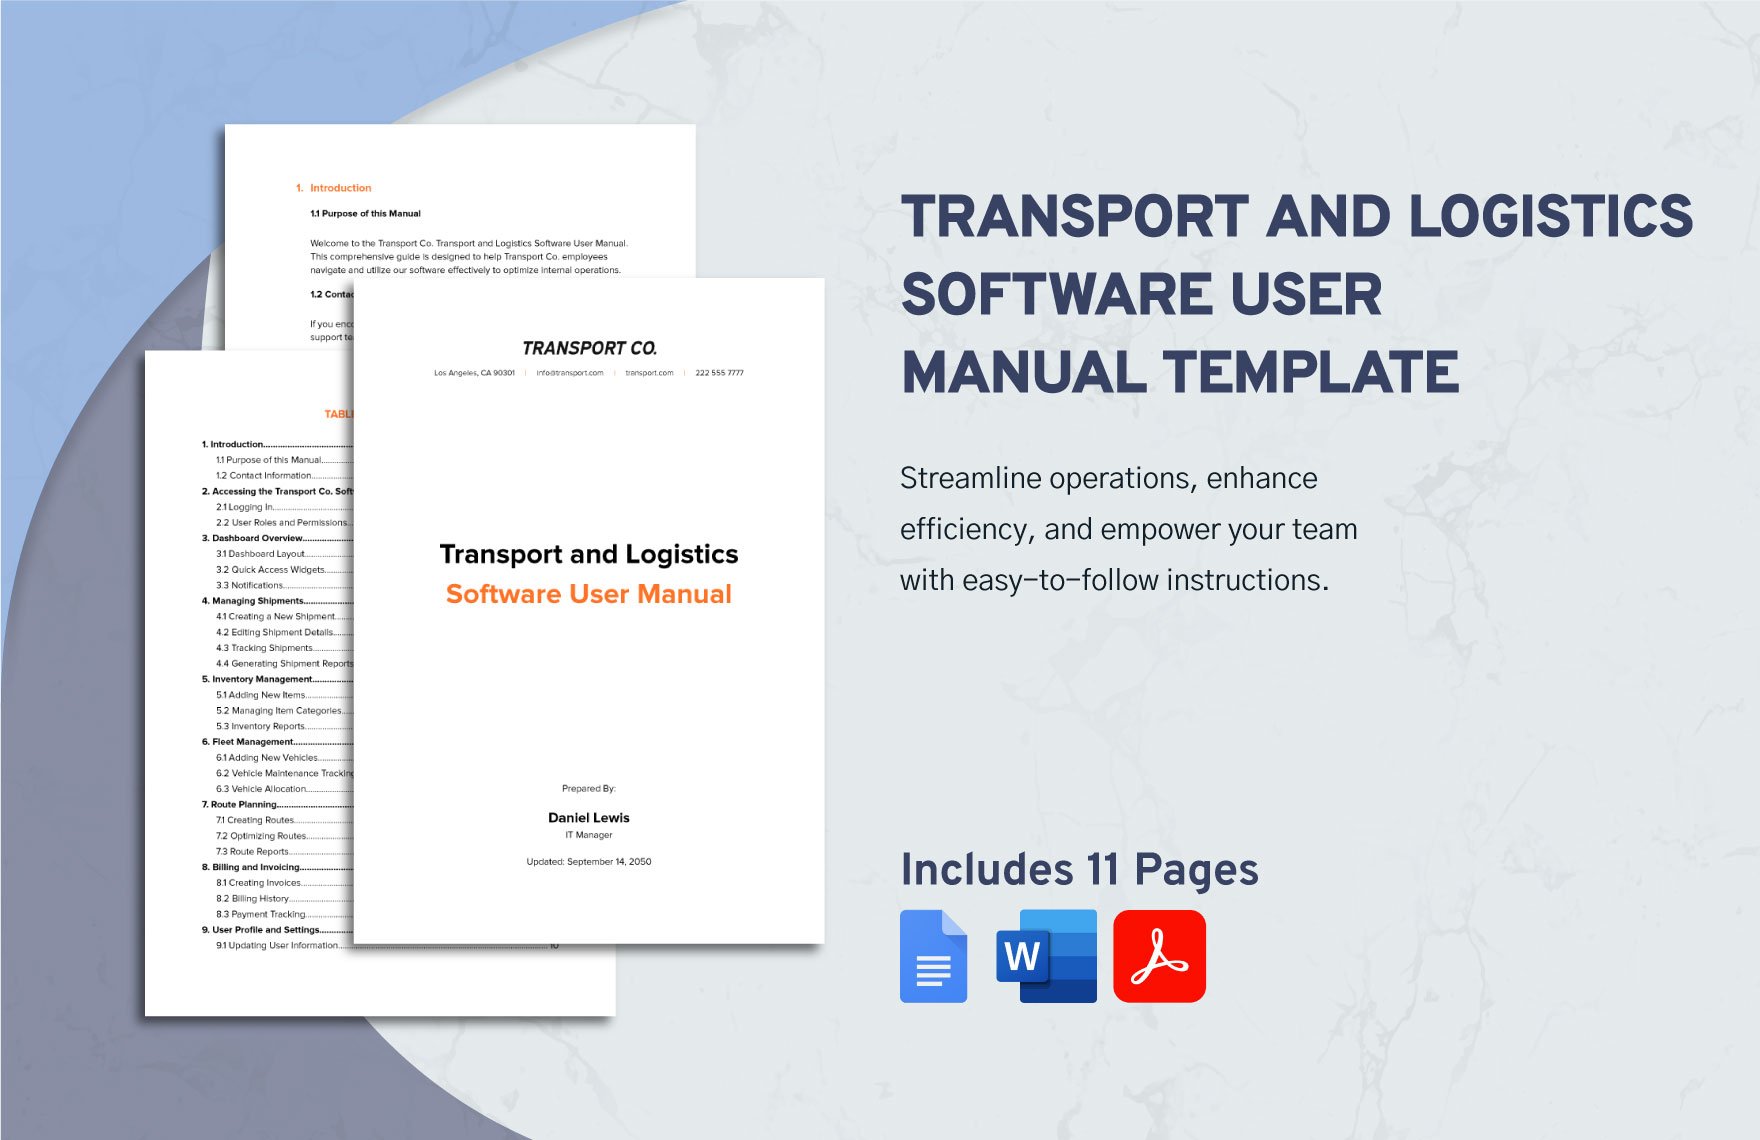 Transport and Logistics Software User Manual Template